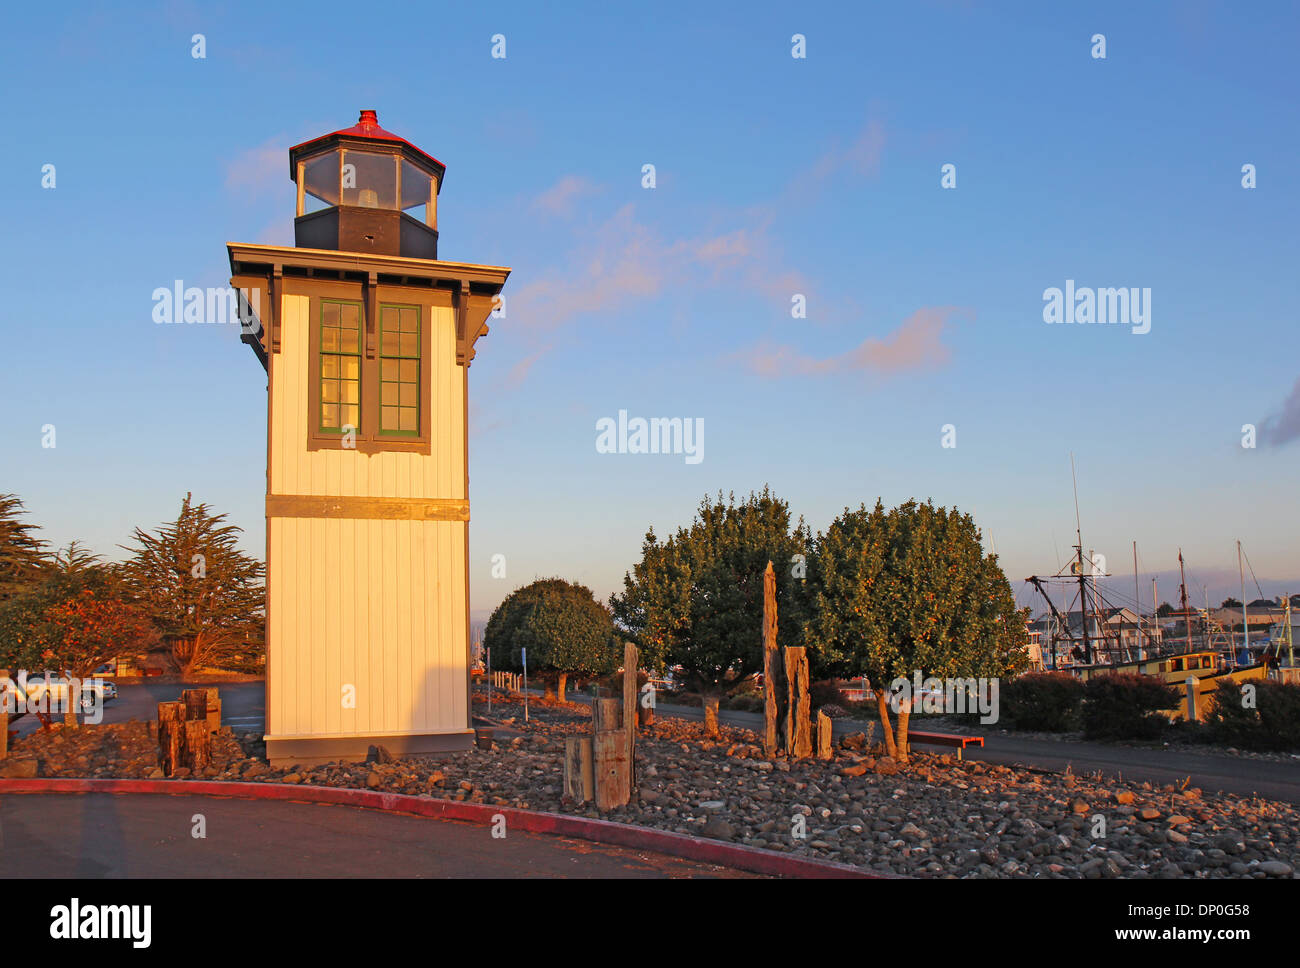 The Table Bluff Lighthouse for Humboldt Bay at Woodley Island Marina in Eureka, California Stock Photo